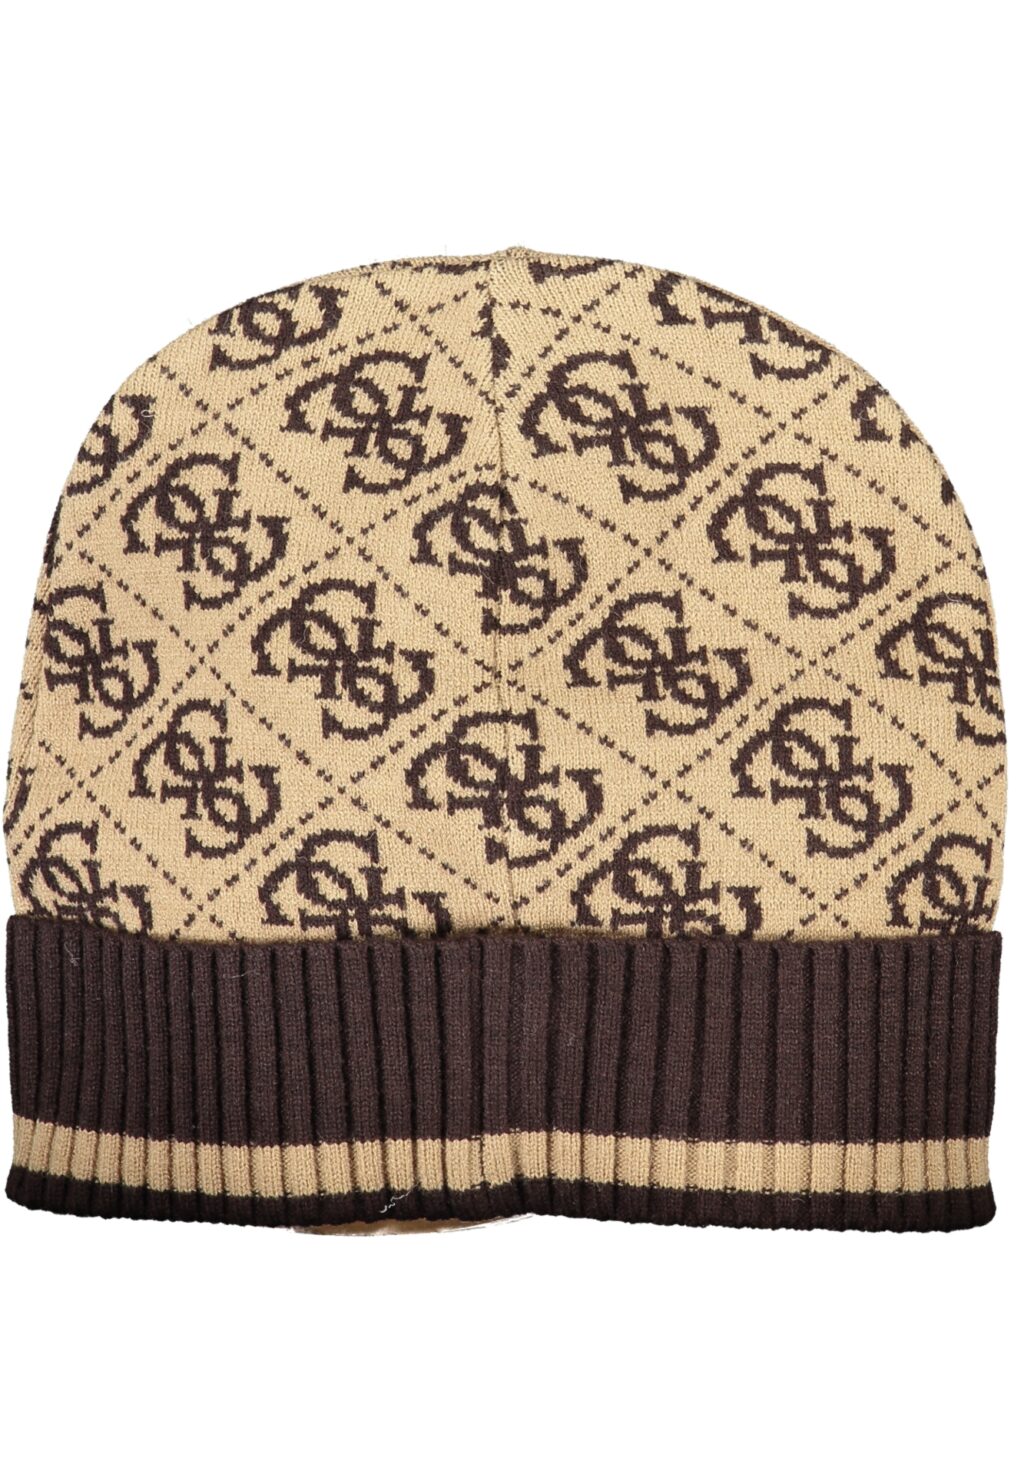 GIUESS JEANS BROWN MEN'S BEANIE AM5028POL01_MABBO